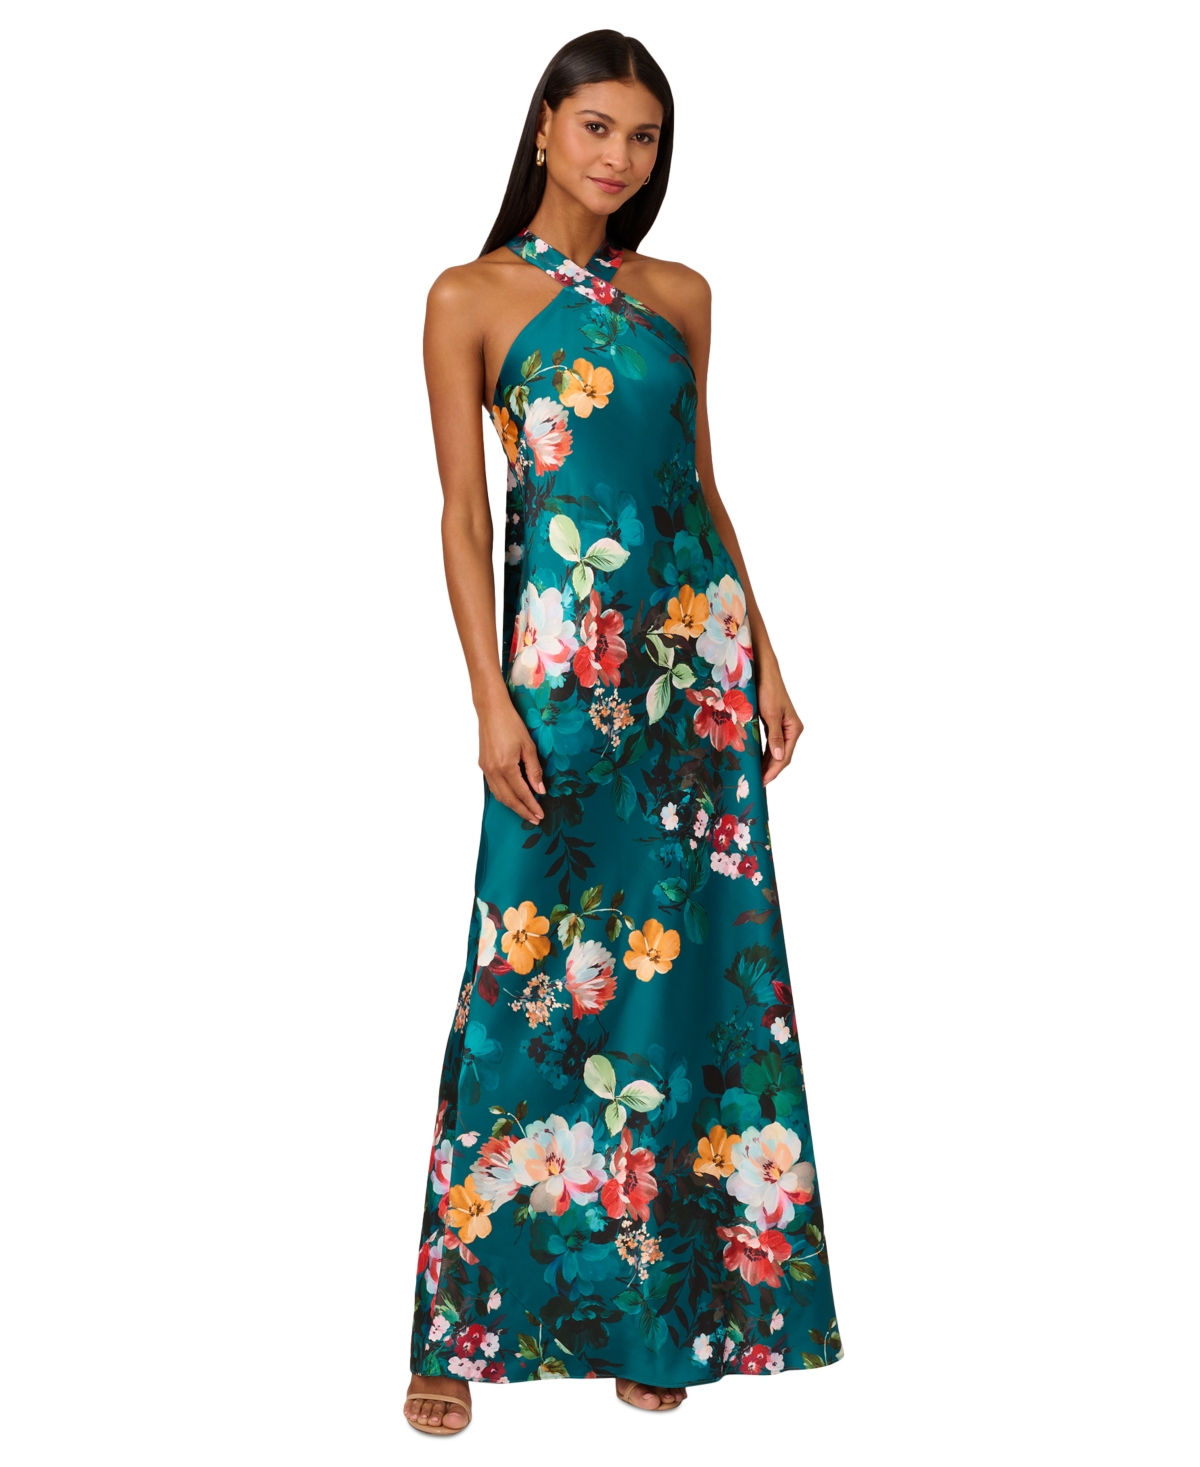 Adrianna By Adrianna Papell Women's Printed Drape-back Halter Gown In Teal Multi